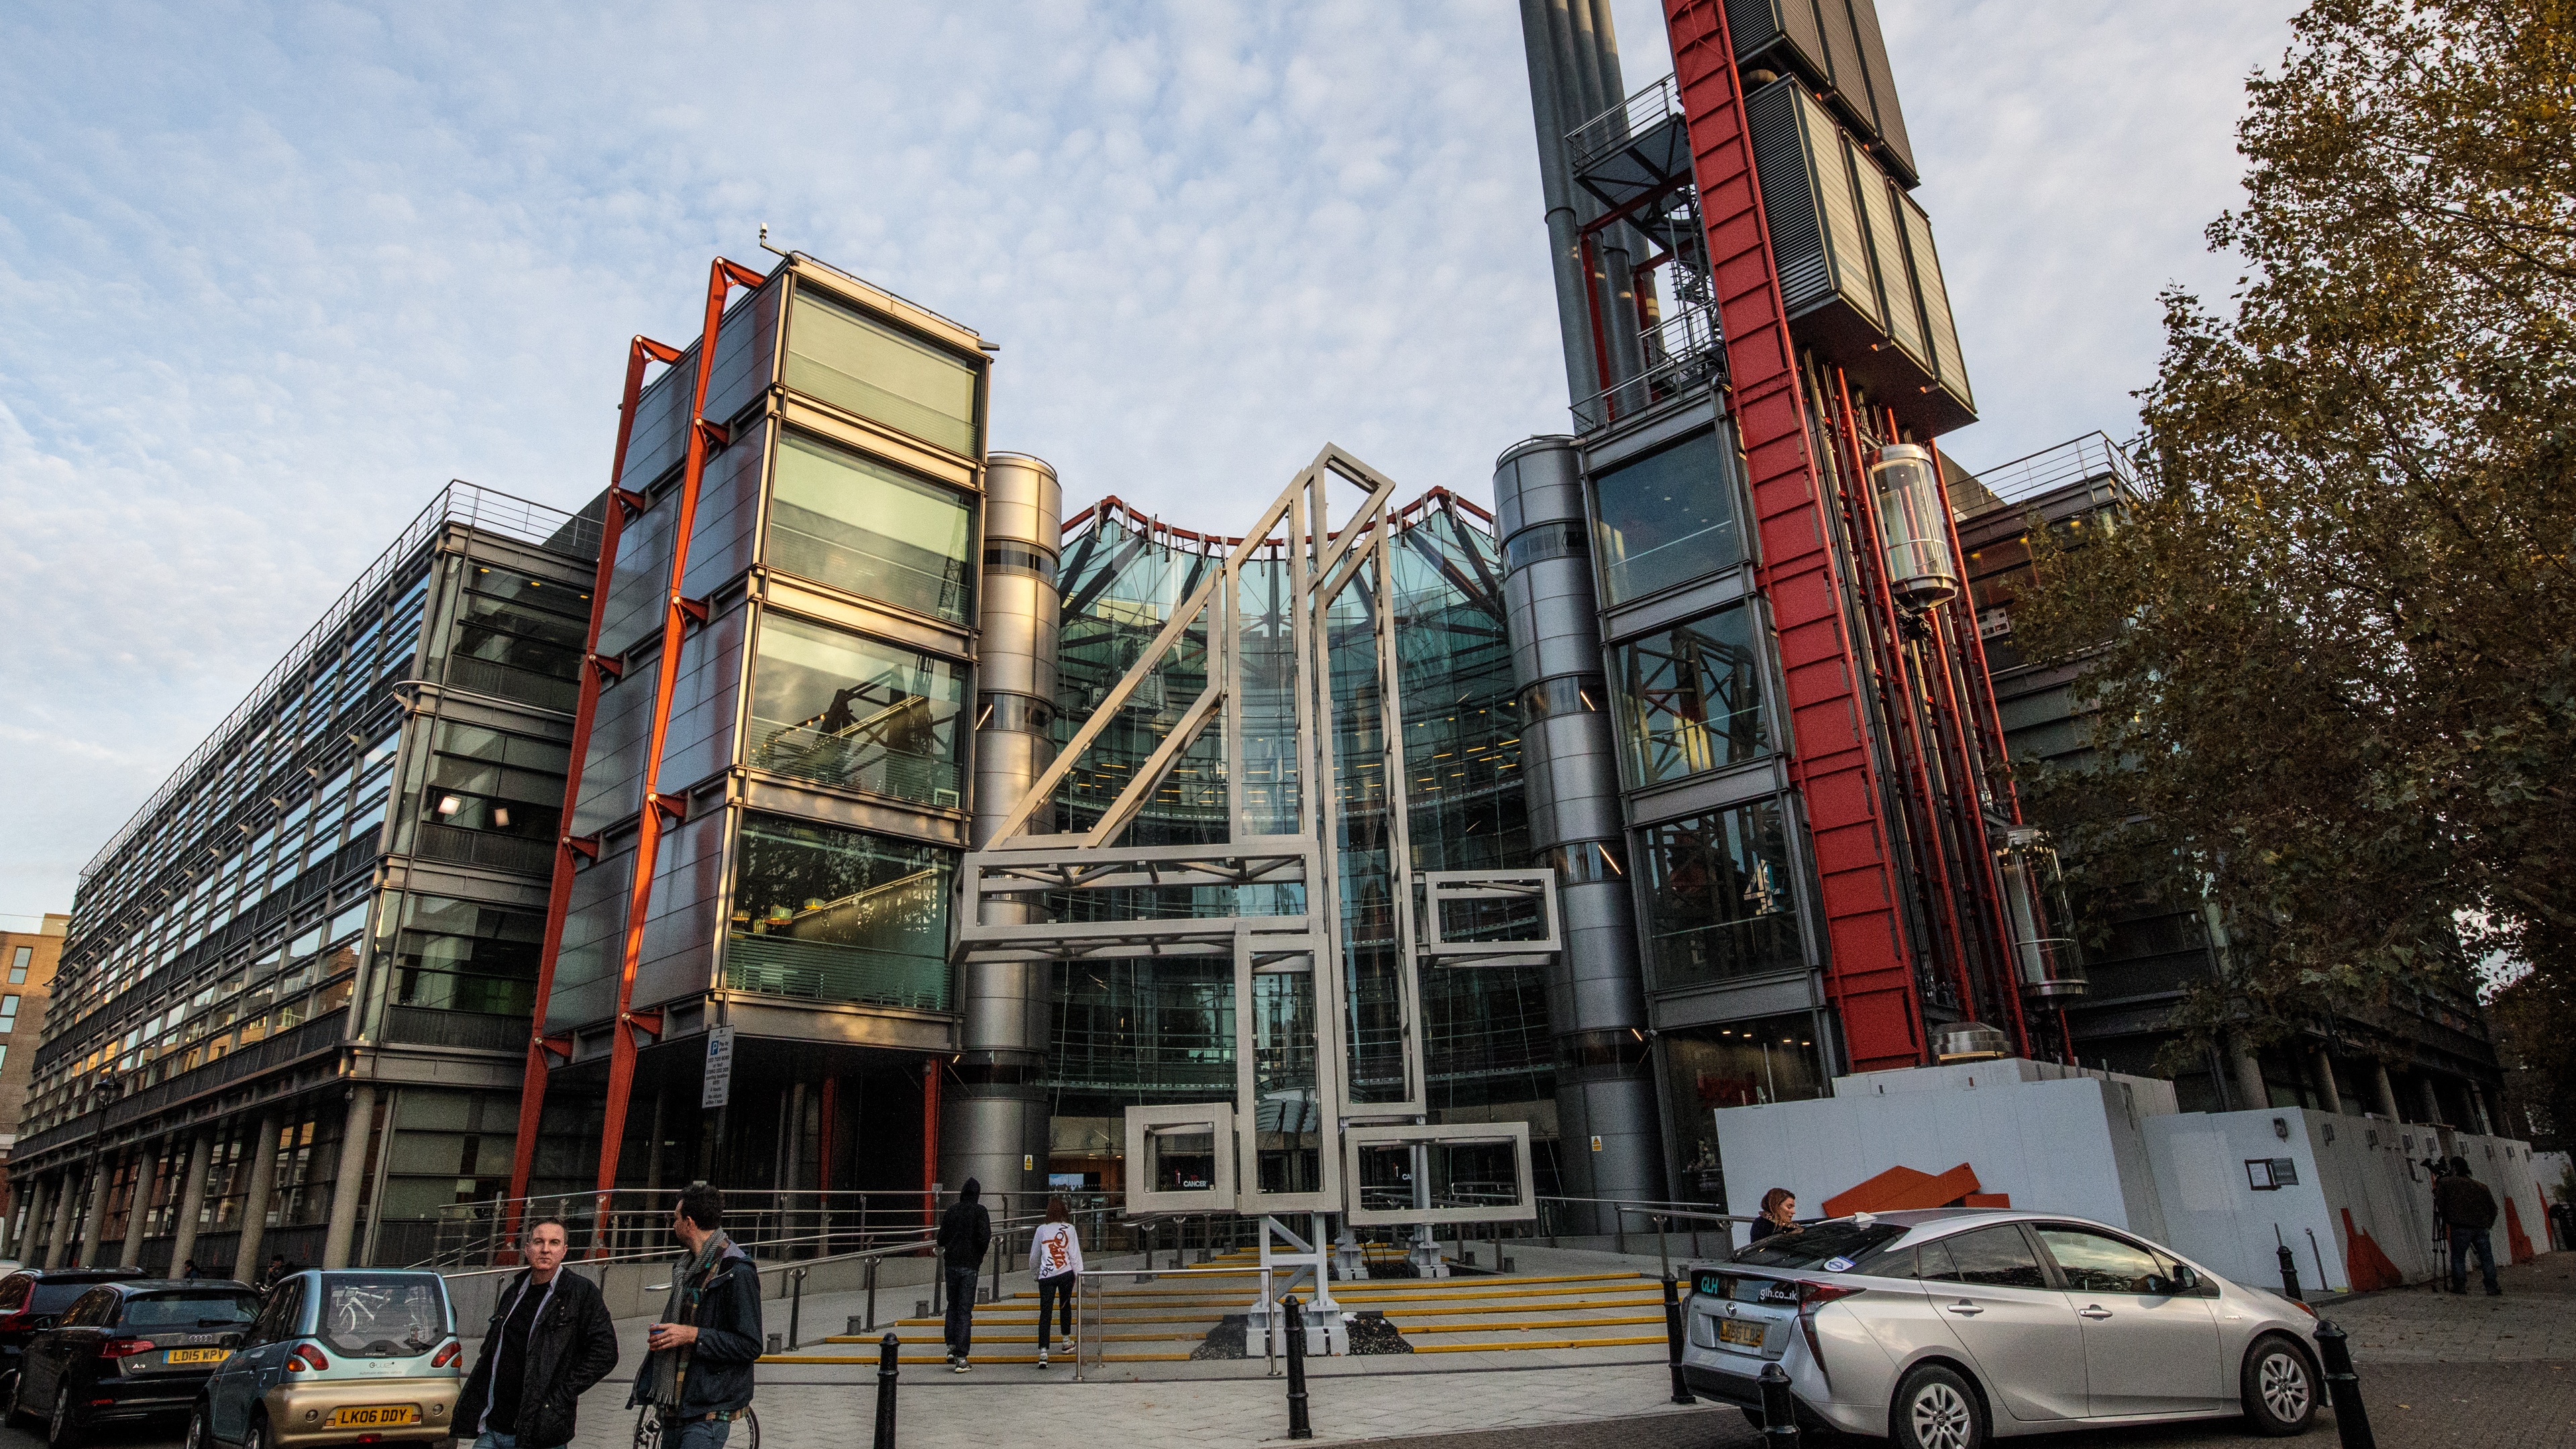 Channel 4’s headquarters in Horseferry Road, London